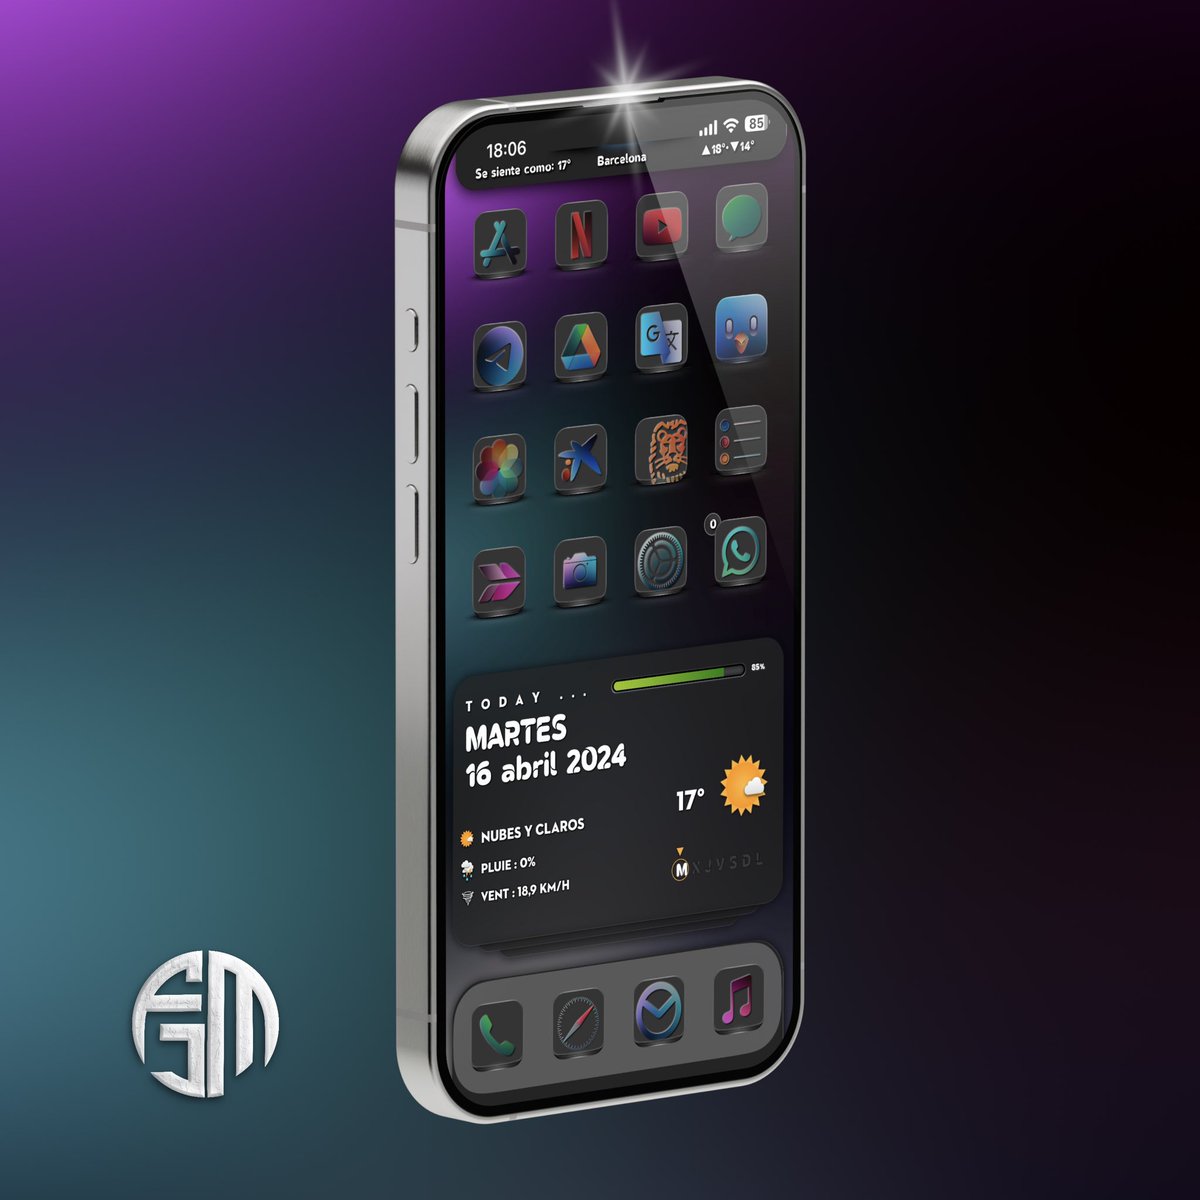 Happy Tuesday🙋🏽‍♂️📱13 Pro Max🕺🏽YoorWeather🔥😍by @JCRocky5 M and ShowAE🔥😍by @SeanKly beautiful icons IOS 14🔥😍by @jayhong865 SWAapp,Wall and widget by my dear @TeboulDavid1 Credits where due for the rest @EliseMihael @UtdAll @thgr34td4n3 @Leonel182520 @kelvingenao01 @luis9_49